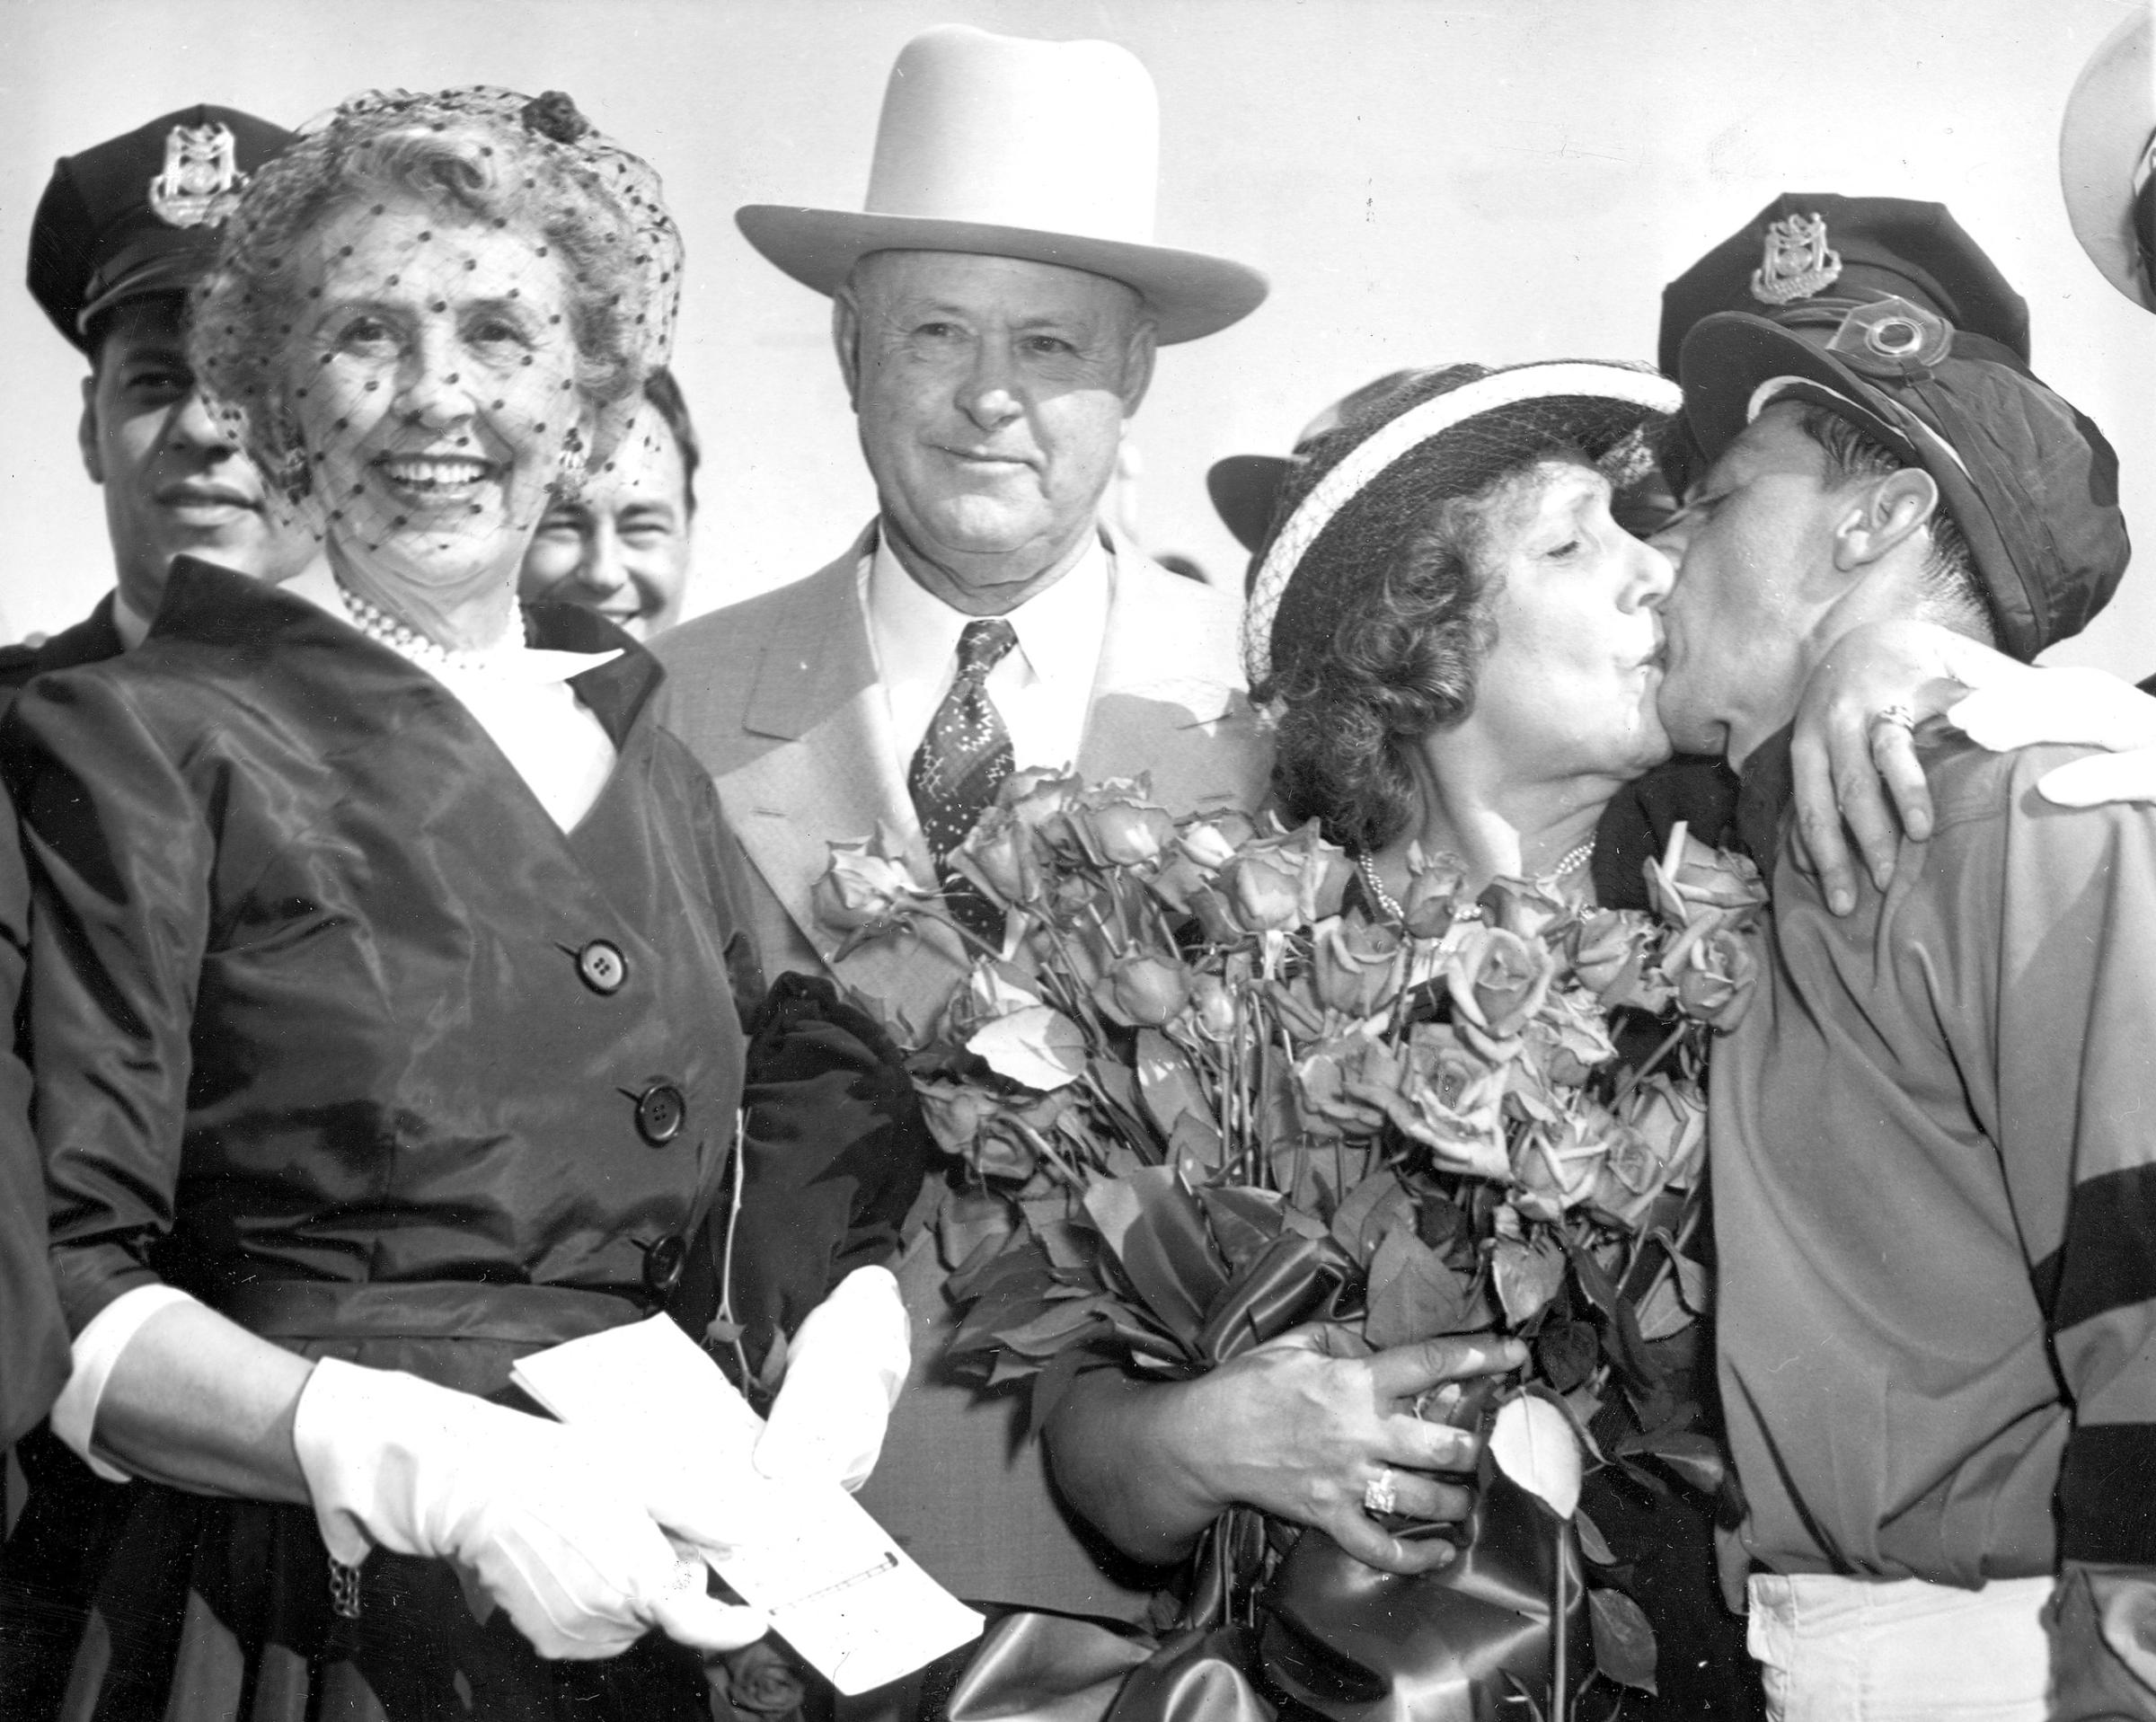 Jockey Eddie Arcaro is kissed by his mother, Josephine, holding roses, after winning the Kentucky Derby at Churchill Downs, Louisville, Ky., on May 3, 1952. At left is Lucille Parker Wright, whose racing stable Calumet Farm has had five Derby winners. At center is Ben Jones, who has trained all six Derby winners.